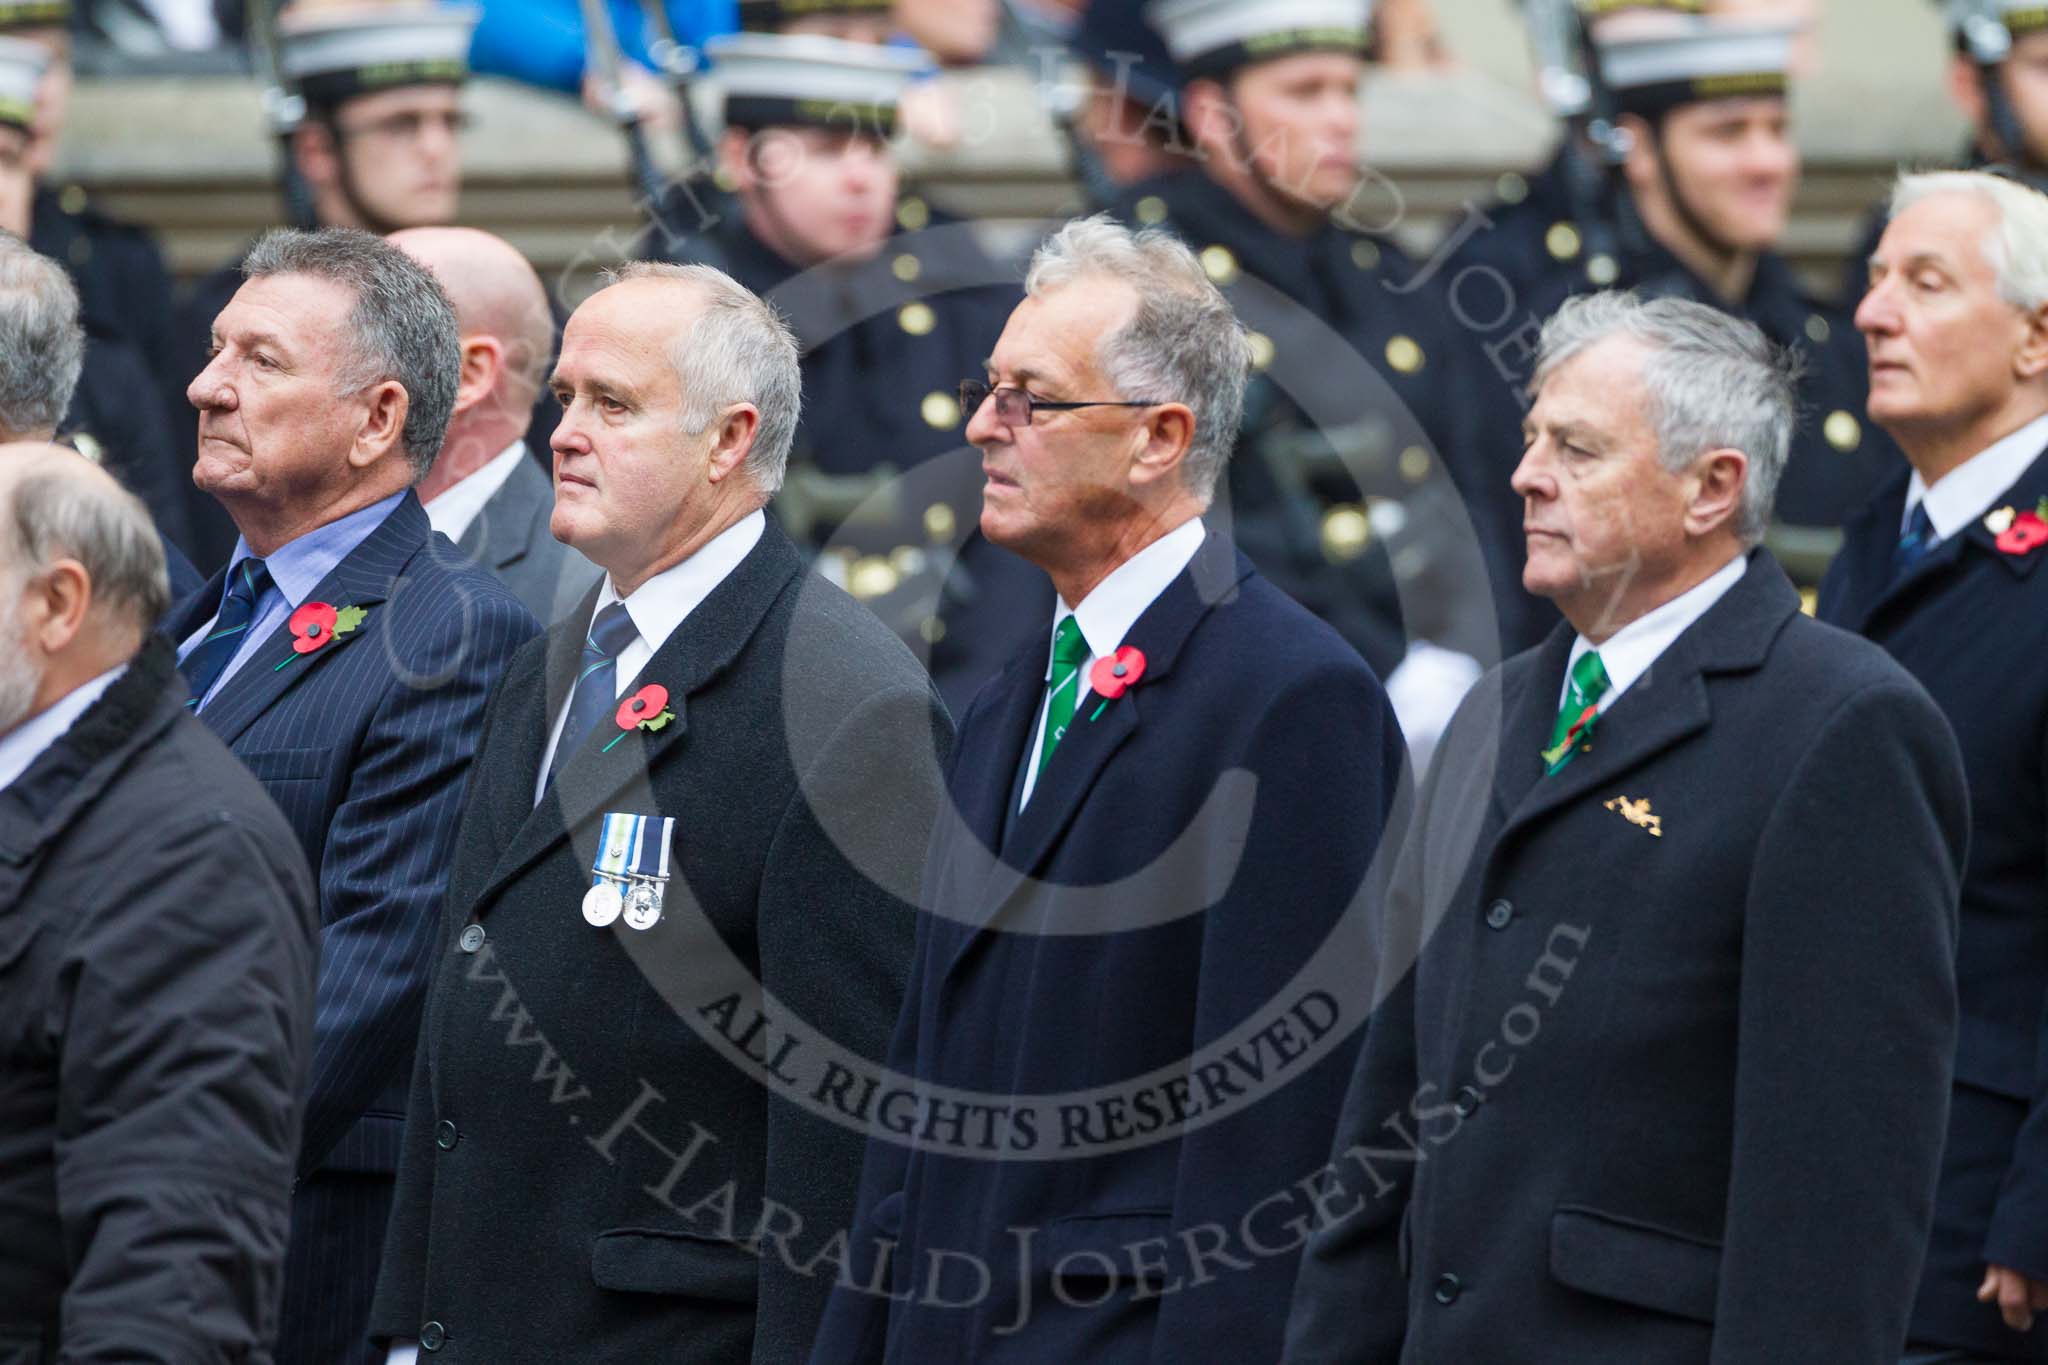 Remembrance Sunday at the Cenotaph 2015: Group E31, The Fisgard Association.
Cenotaph, Whitehall, London SW1,
London,
Greater London,
United Kingdom,
on 08 November 2015 at 12:03, image #969